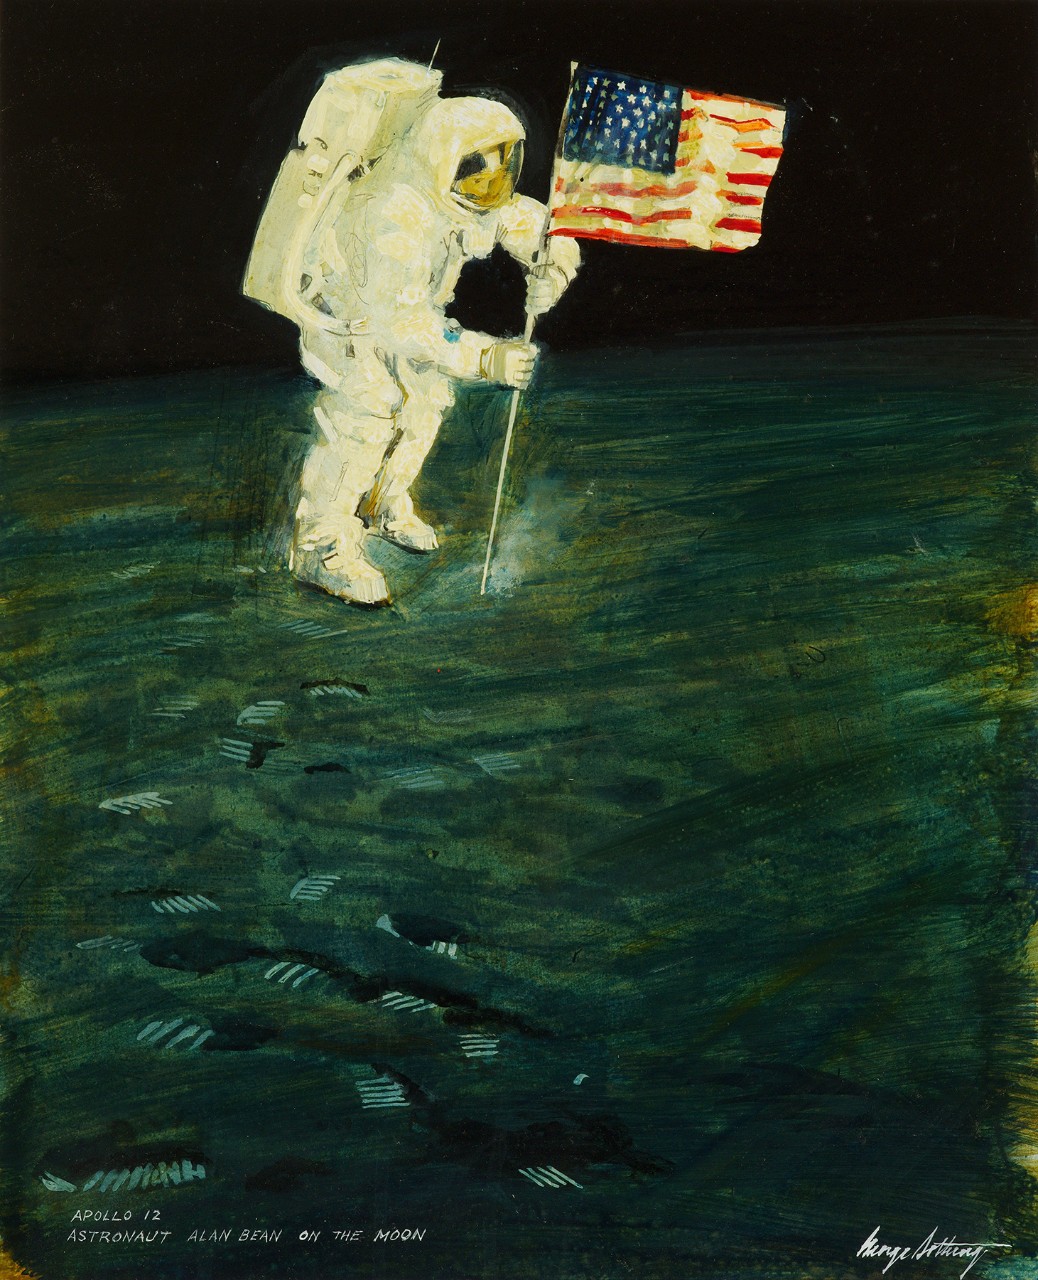 The American flag is planted on the surface of the moon